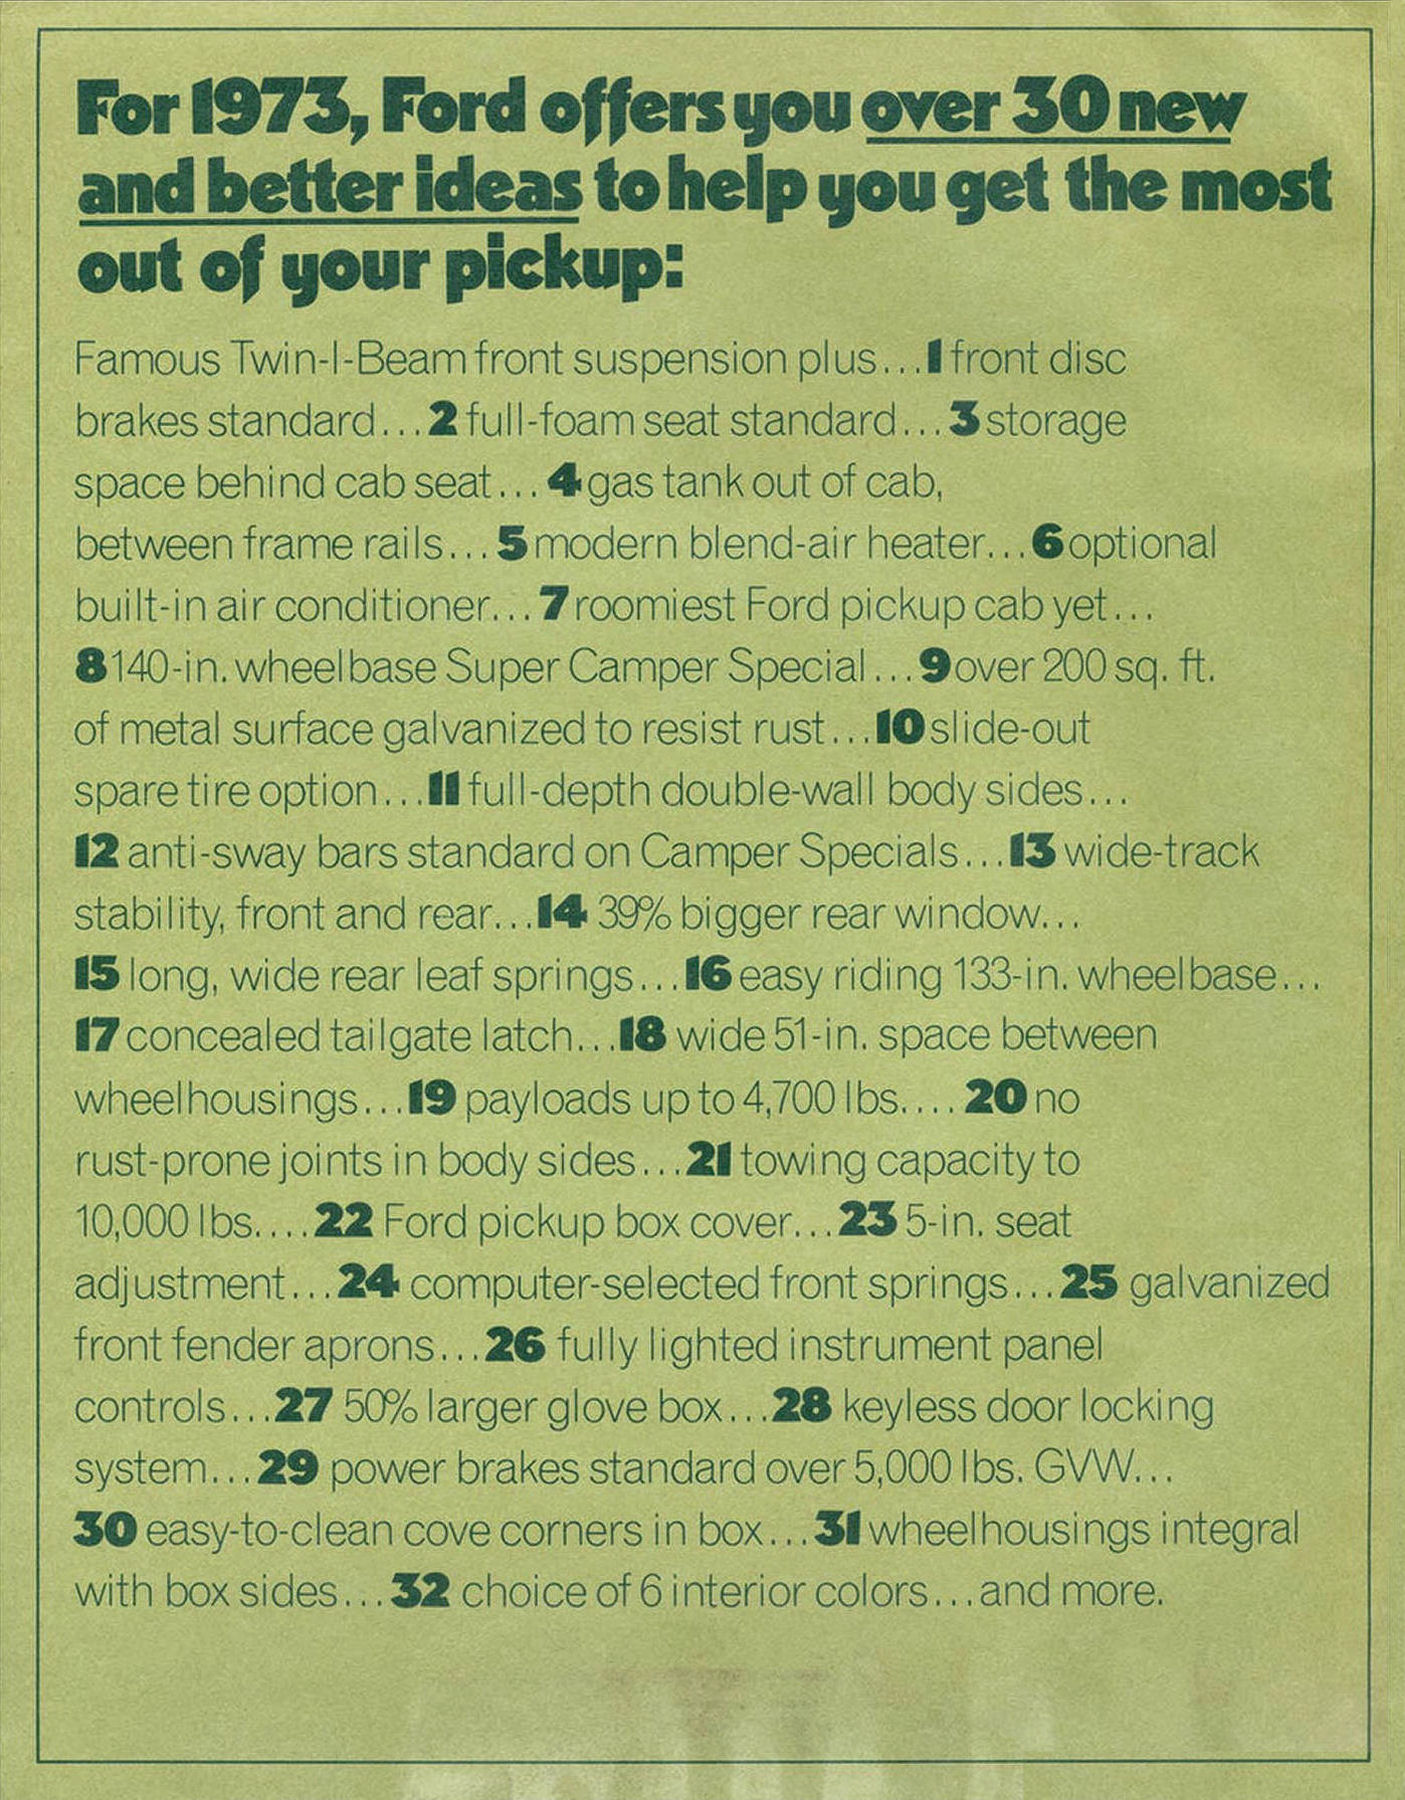 1973 Ford Pickup Facts Mailer-02